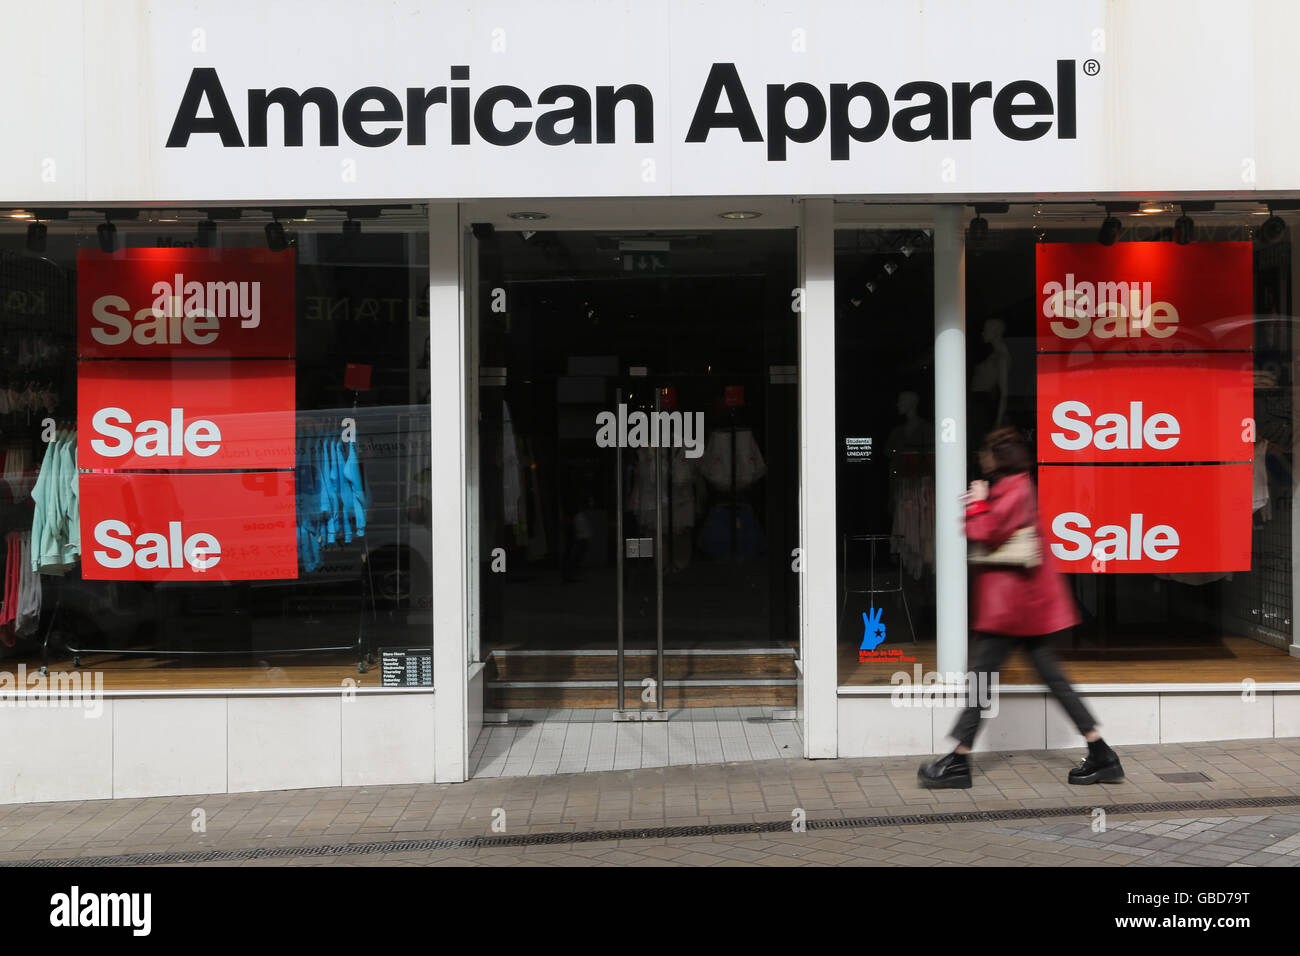 An American Apparel store in Leeds, West Yorkshire. Stock Photo